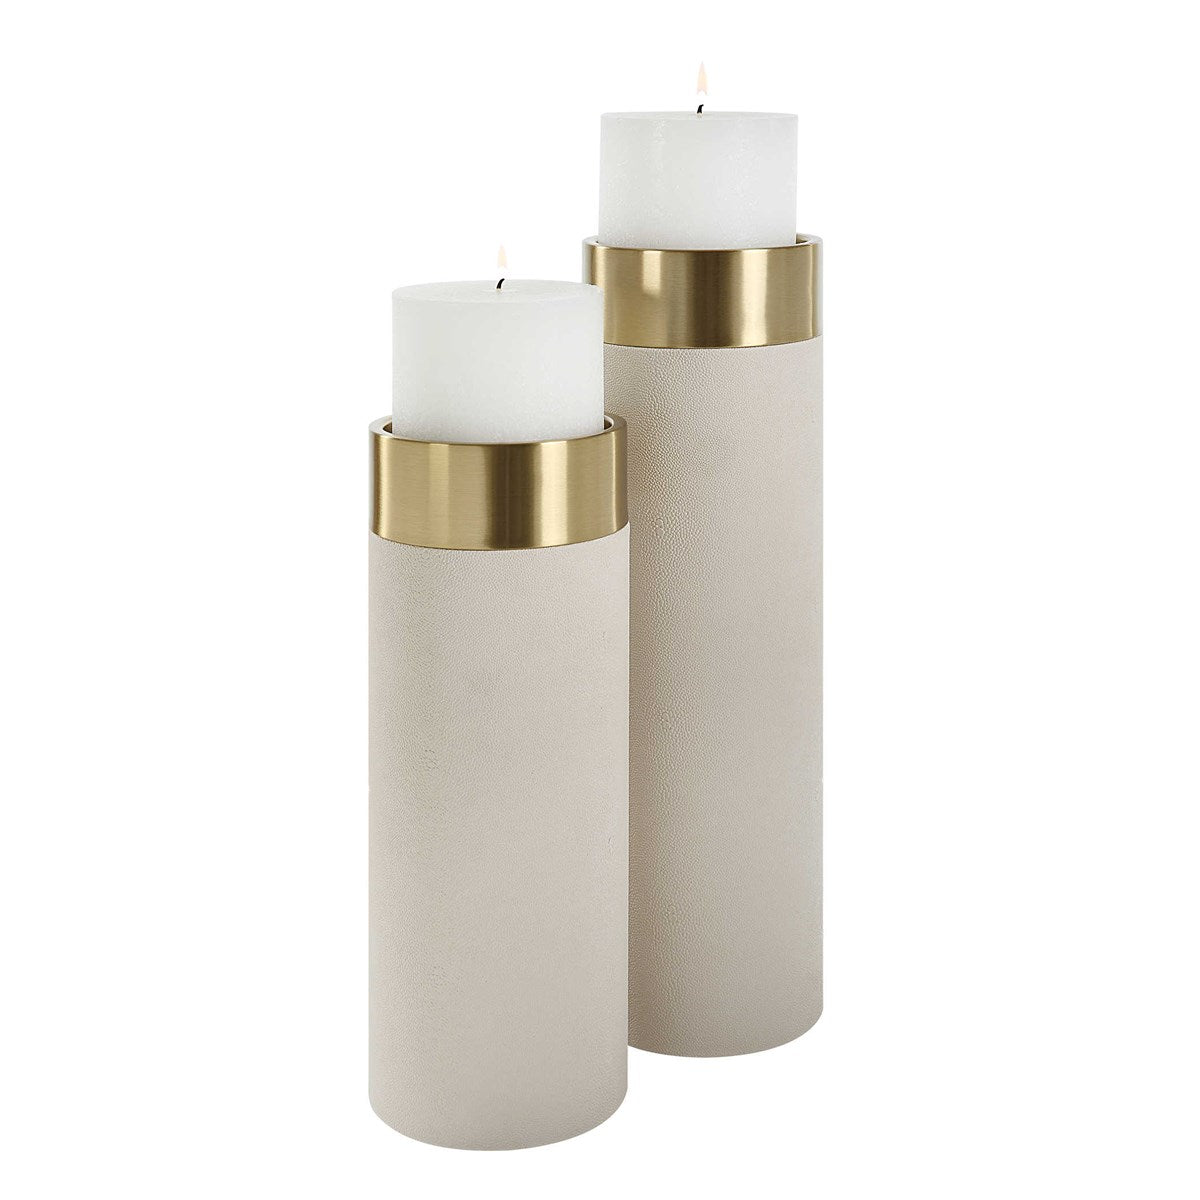 Wessex candleholder set of 2-white faux shagreen